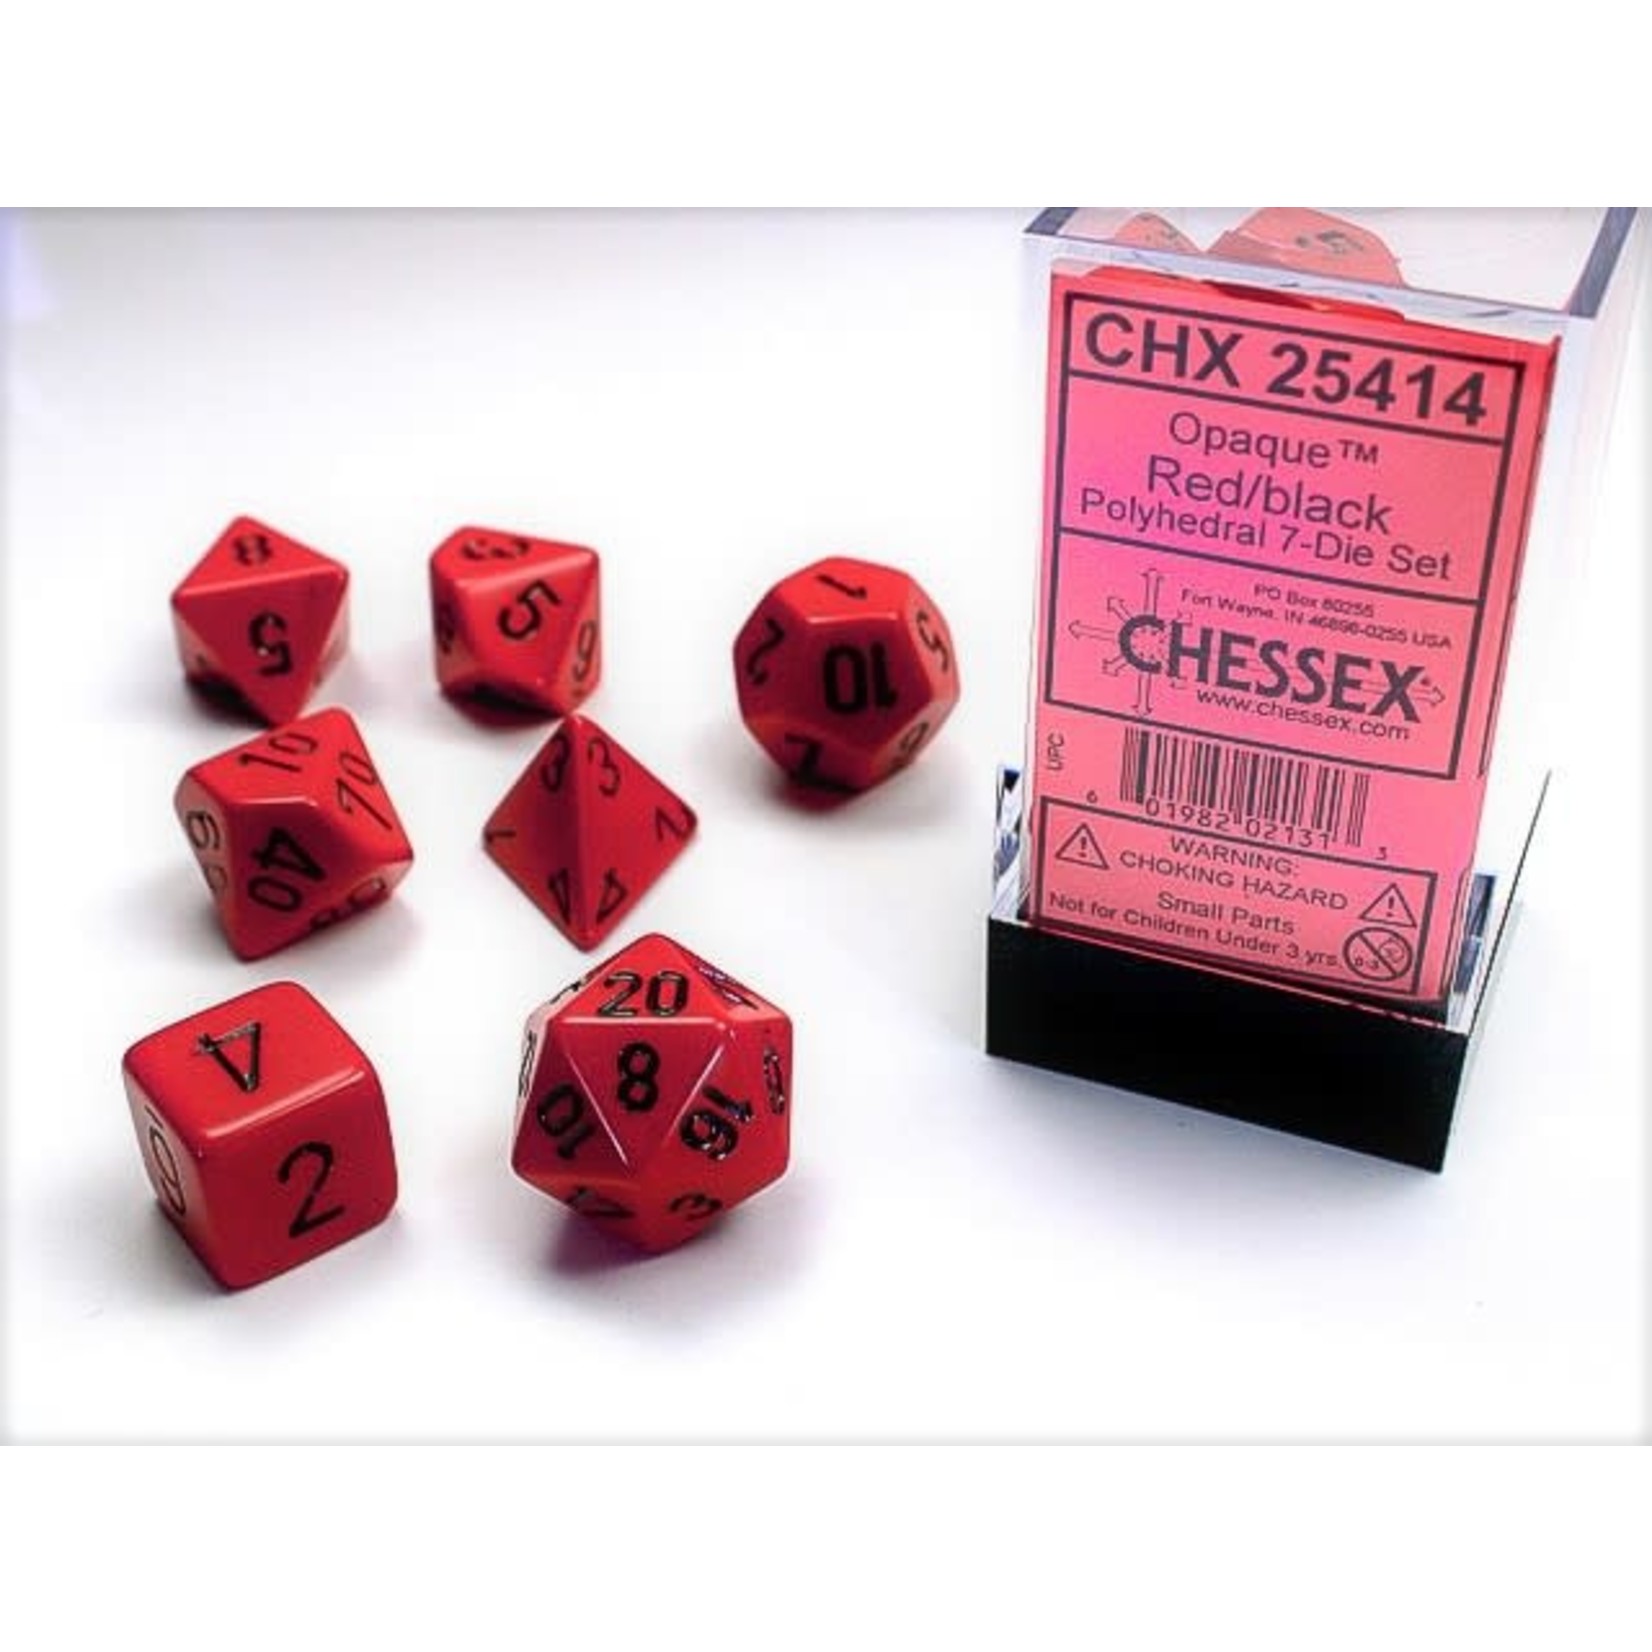 Chessex 25414 Opaque 7pc Red/Black RPG Dice